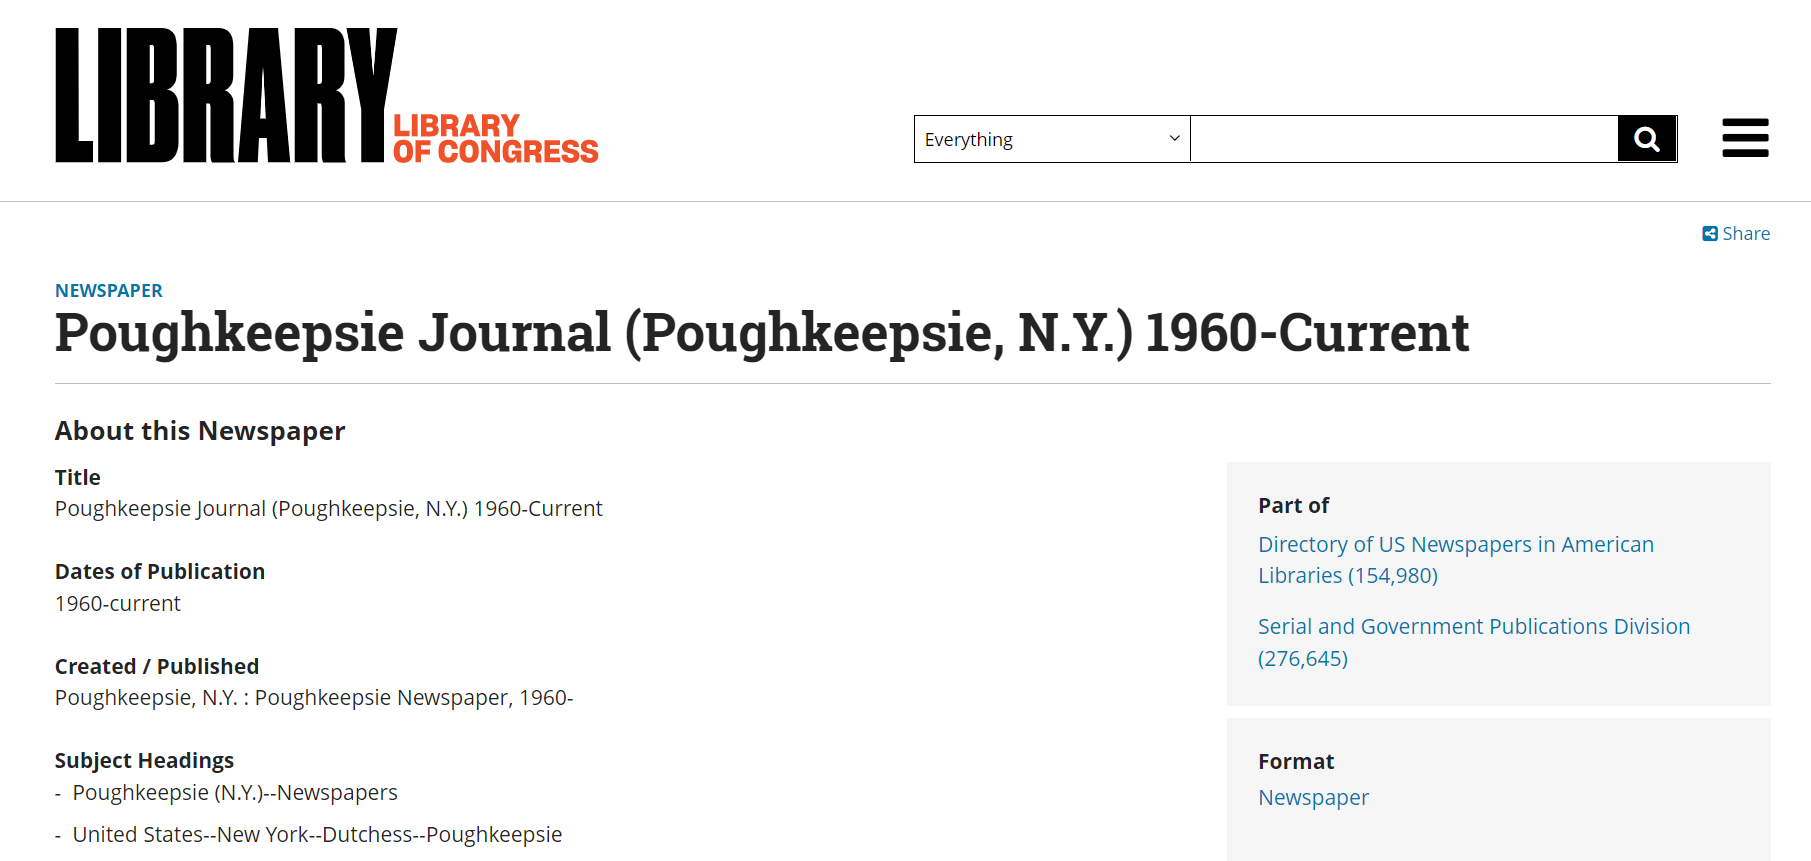 An example of a newspaper, the Poughkeepsie Journal, from the Library of Congress's "Directory of Newspapers in American Libraries" collection